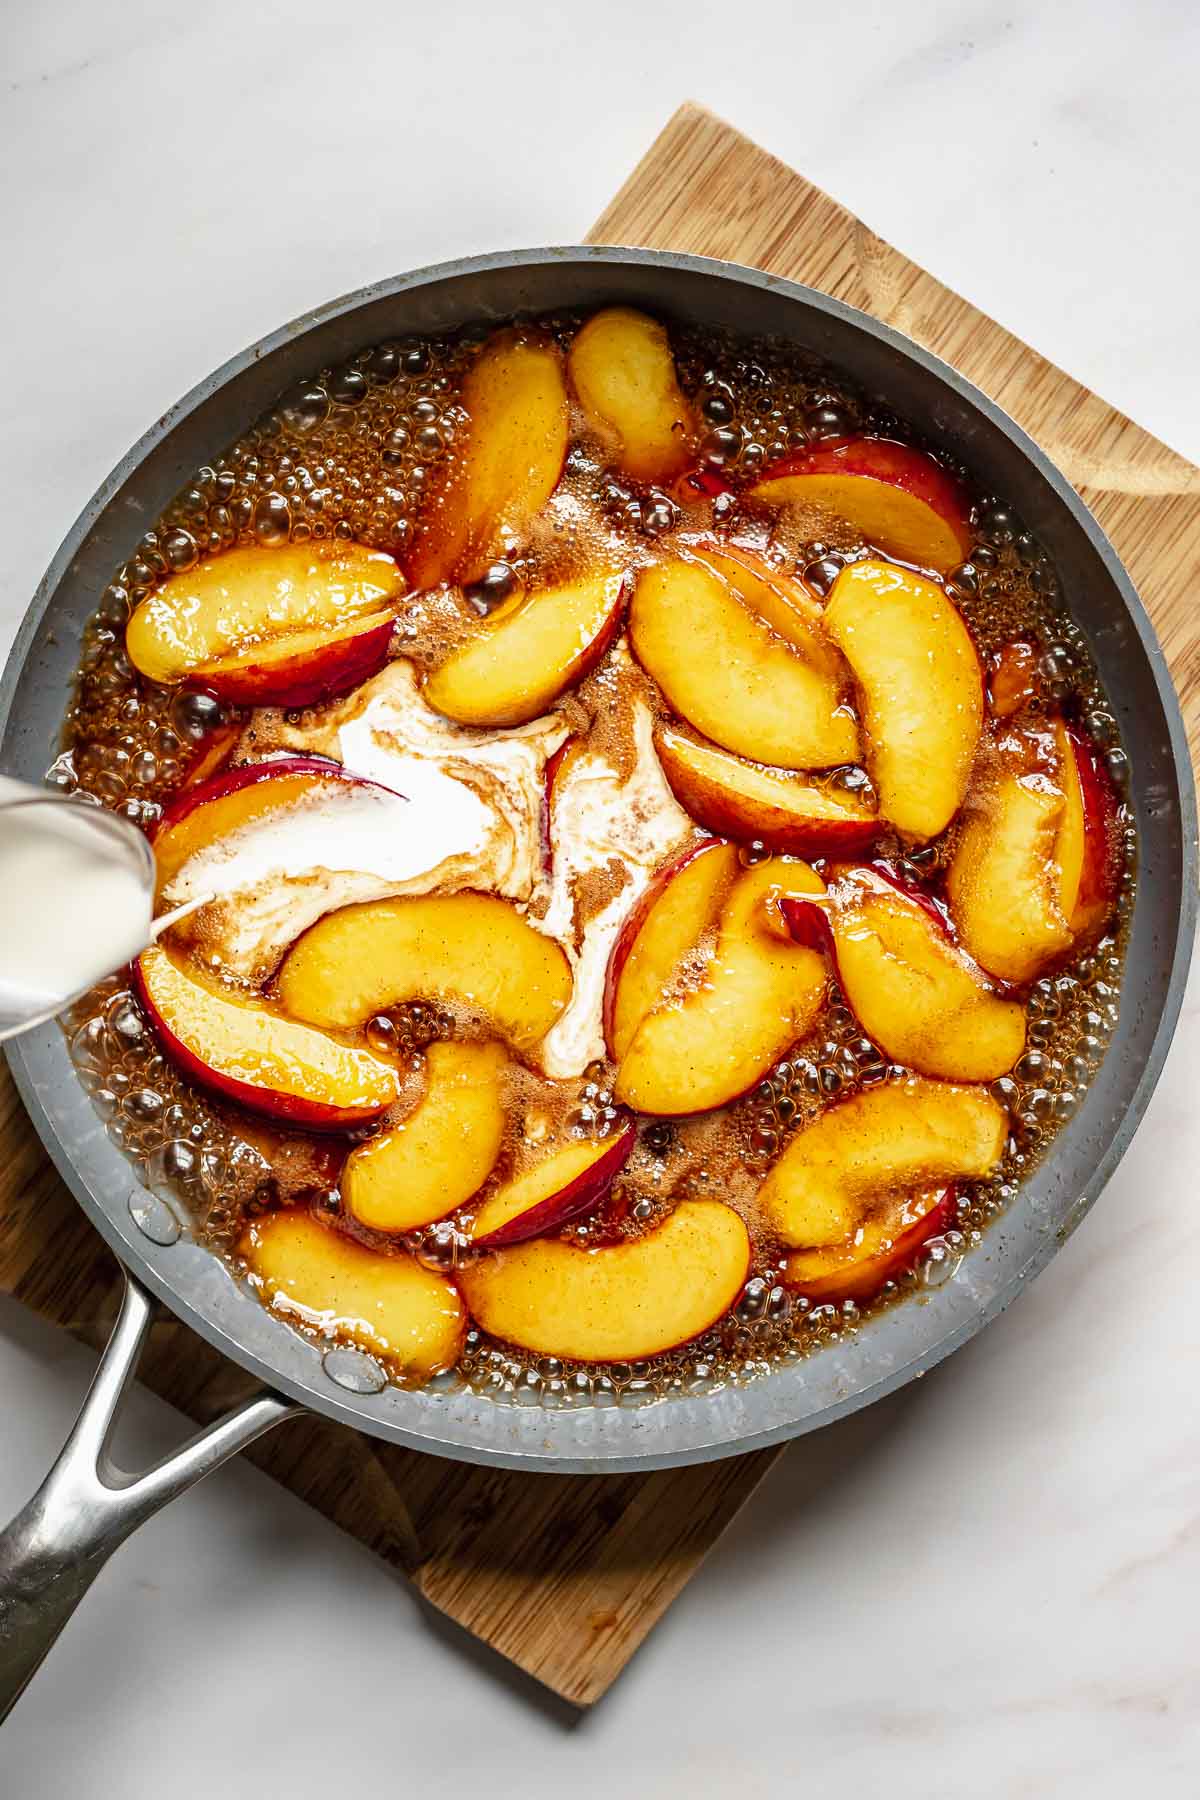 Heavy cream pouring into caramelized peaches.